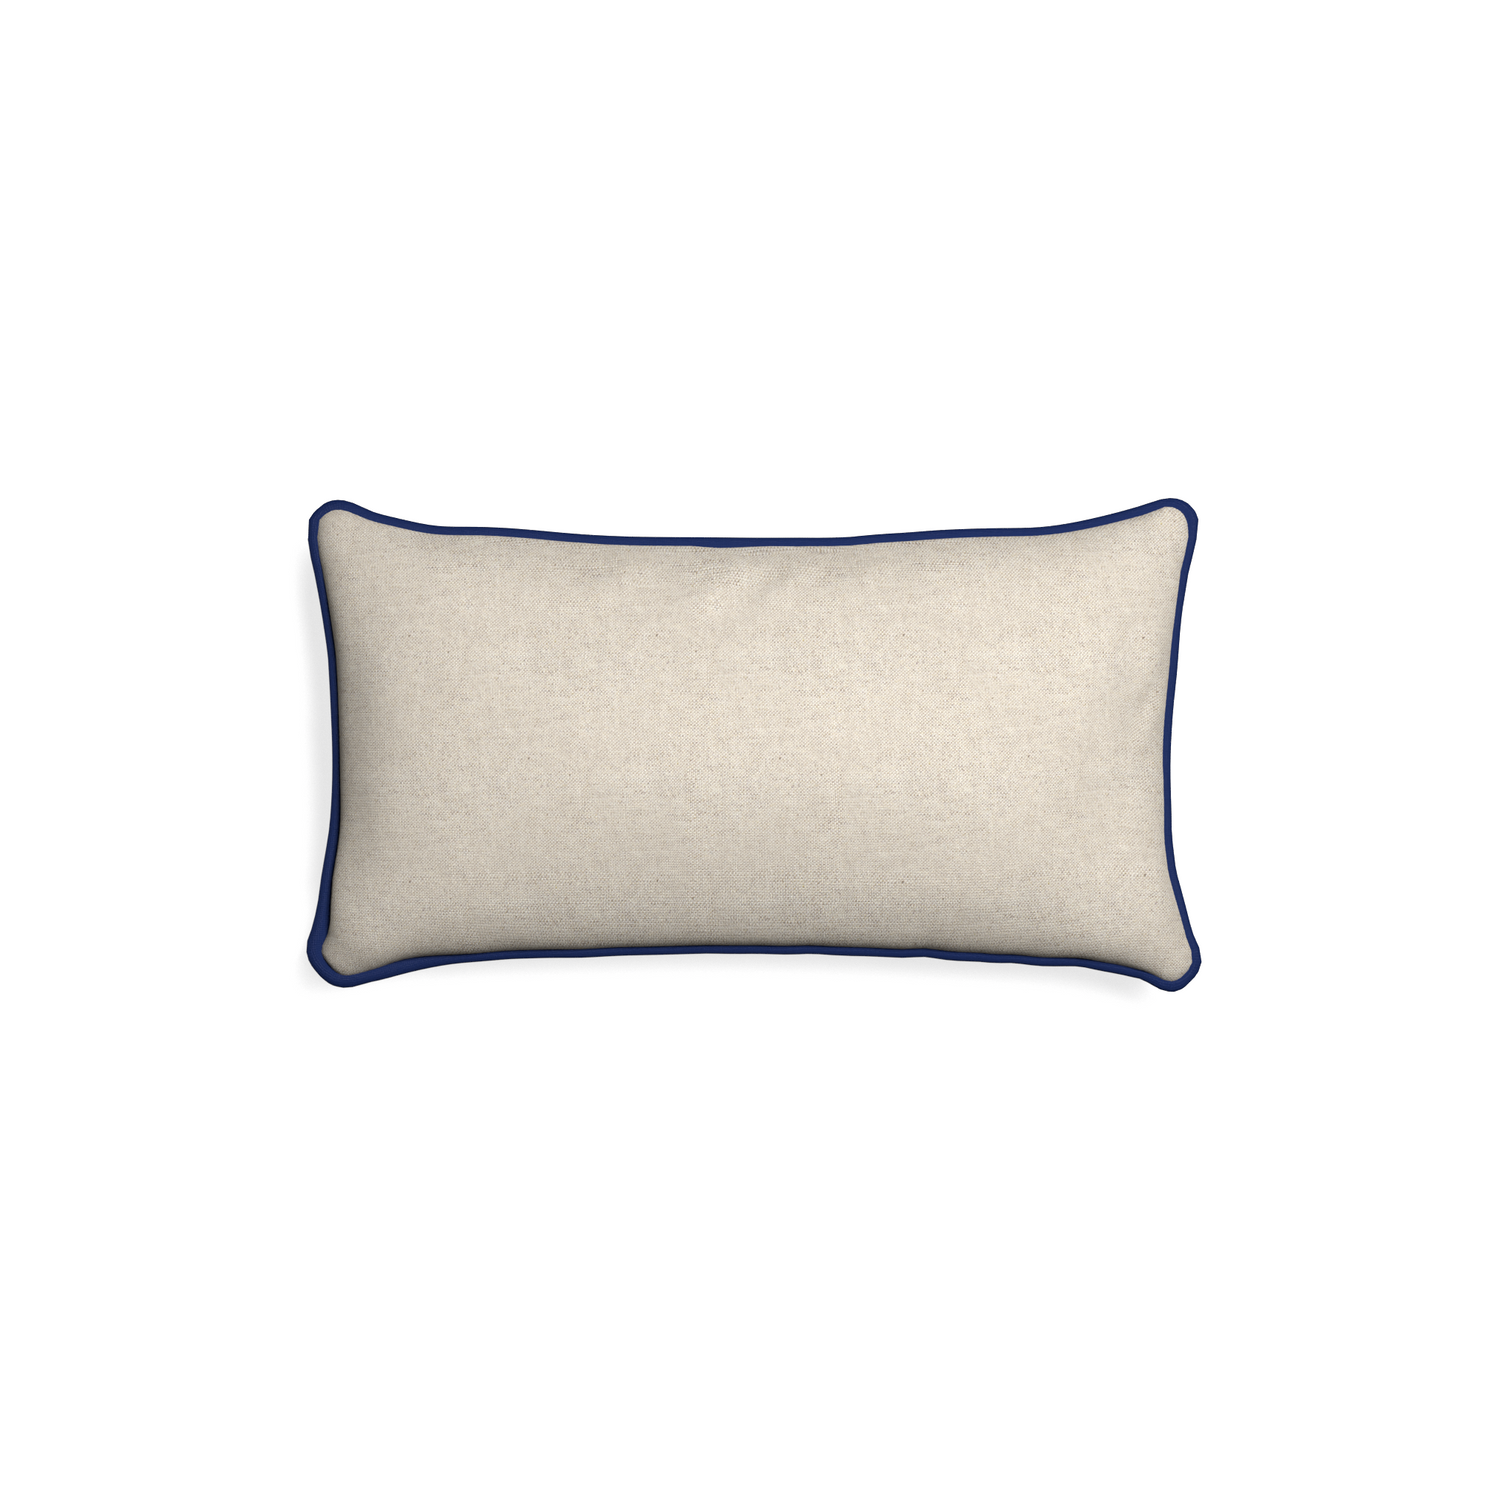 Petite-lumbar oat custom light brownpillow with midnight piping on white background